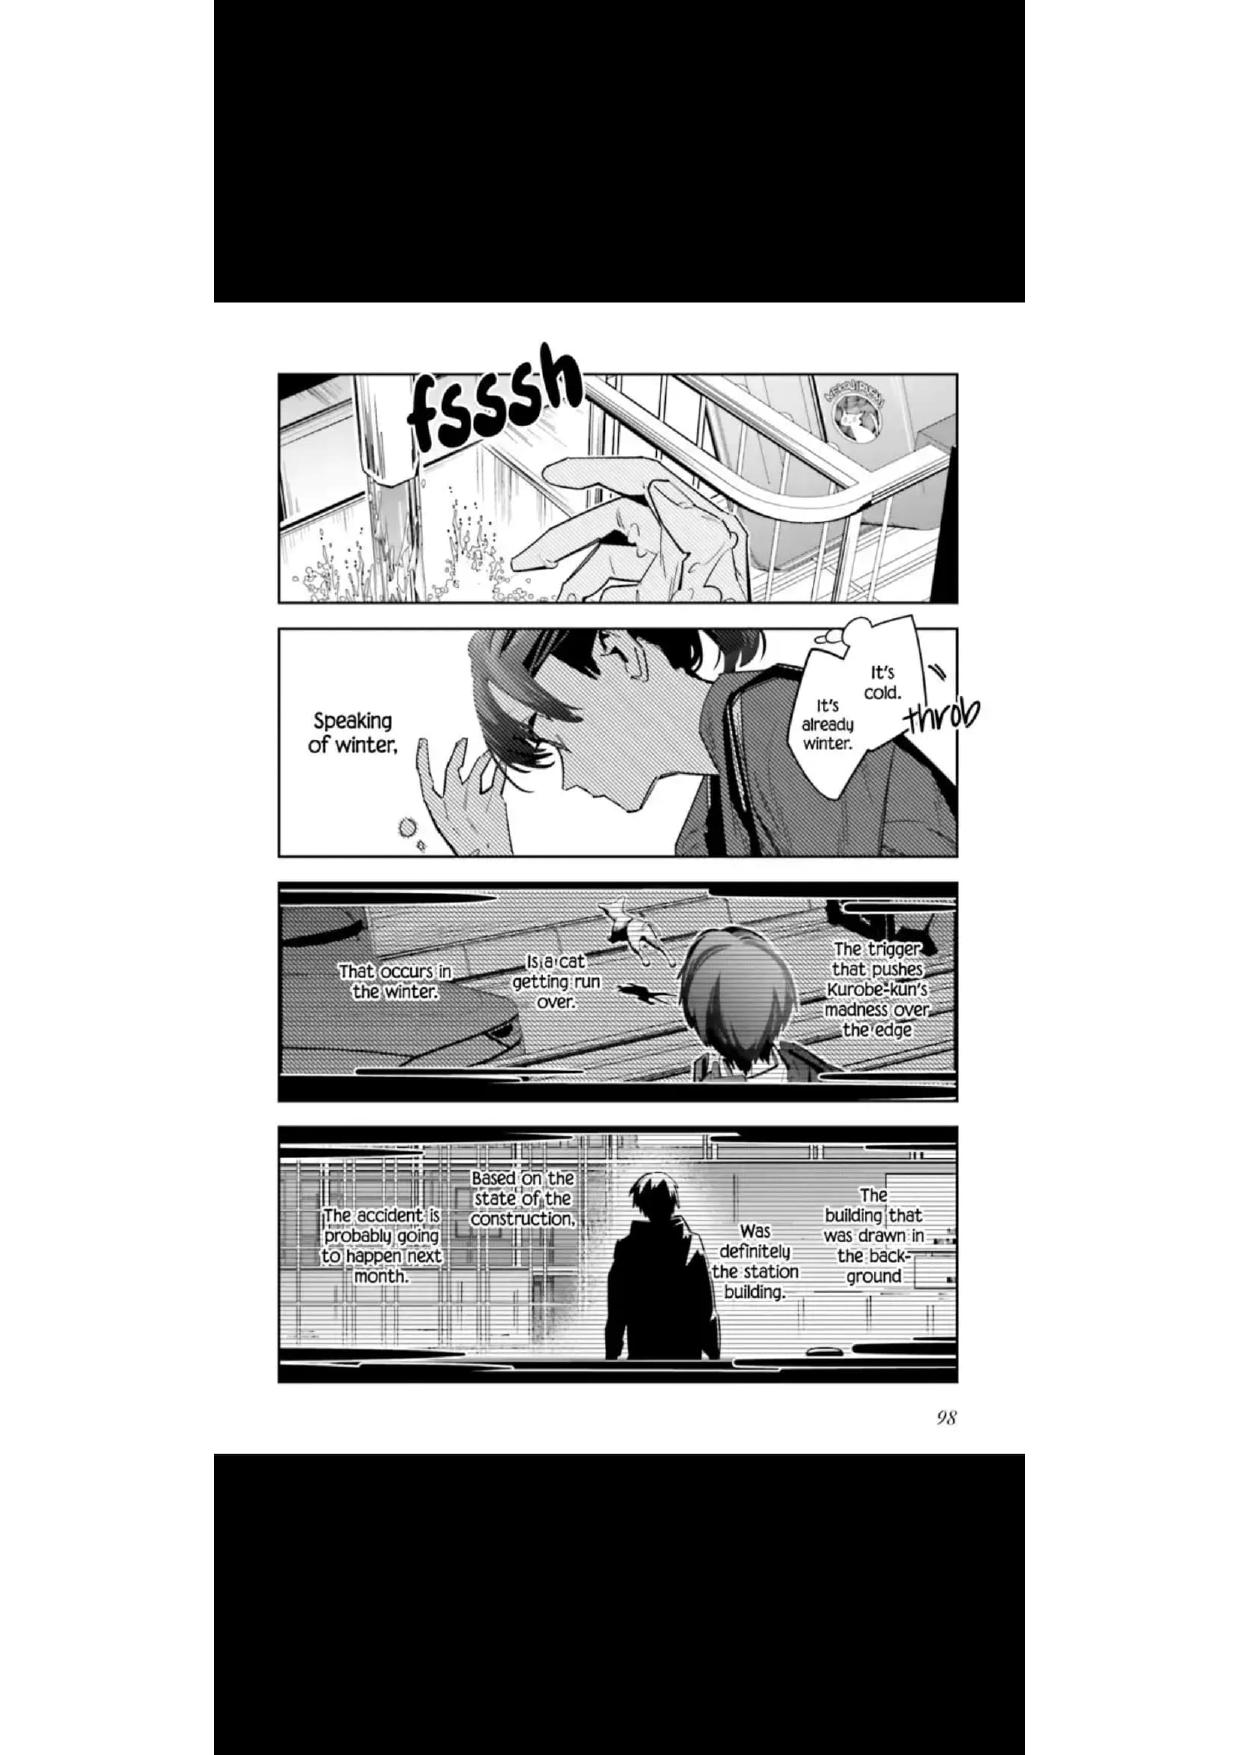 I Reincarnated As The Little Sister Of A Death Game Manga’S Murd3R Mastermind And Failed - Page 4